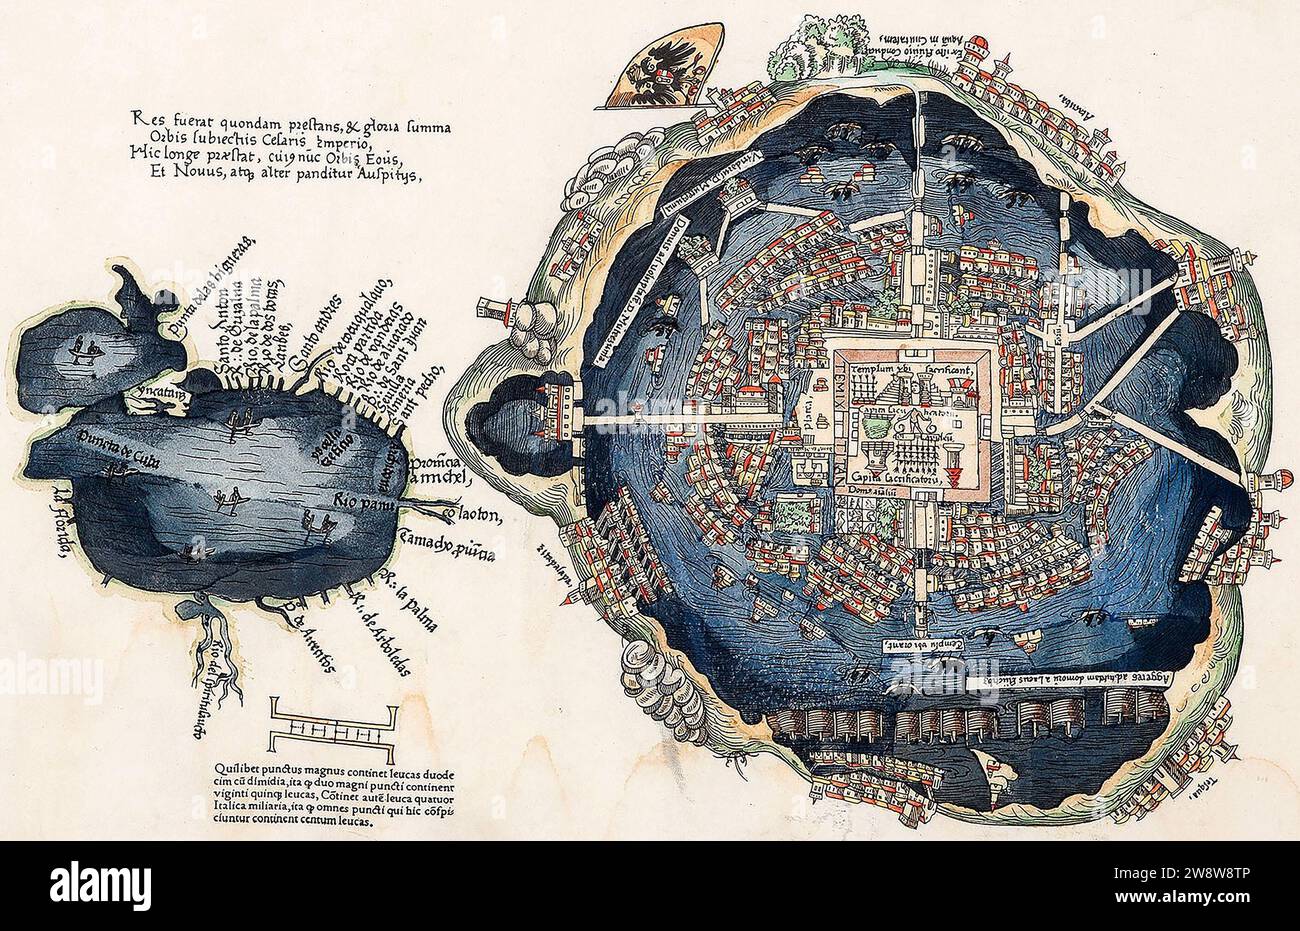 First European Map of Tenochtitlan by Friedrich Peypus, printed 1524 in Nuremberg, Germany. Colorized woodcut. On the left, the Gulf of Mexico (South is at the top, part of Cuba left); on the right, Tenochtitlan with West at the top. Stock Photo